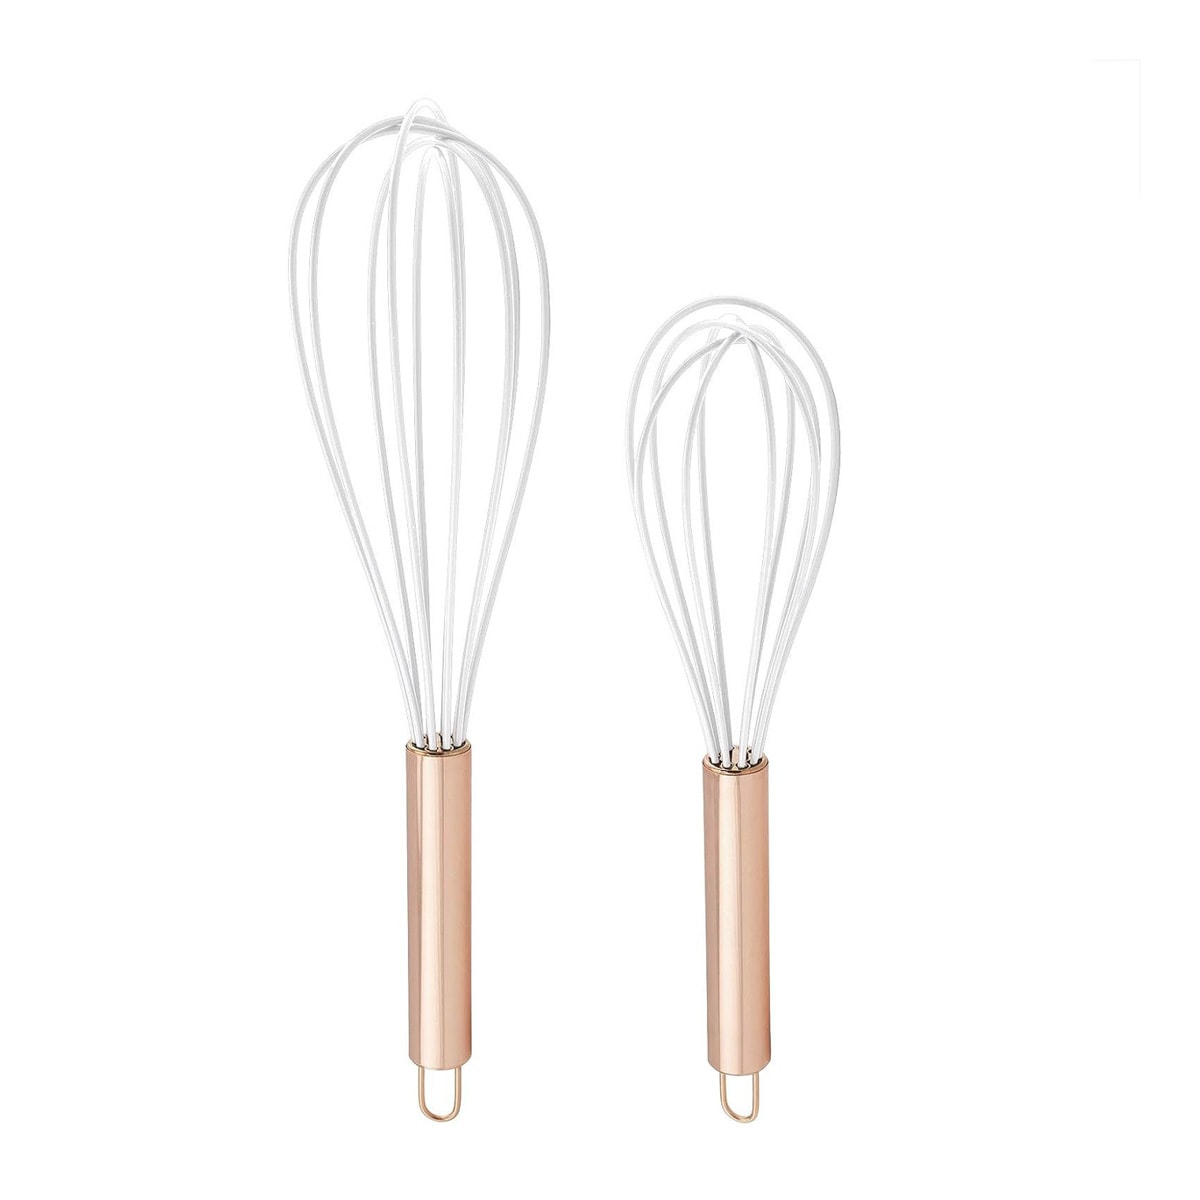 Two wire whisks with gold handles.